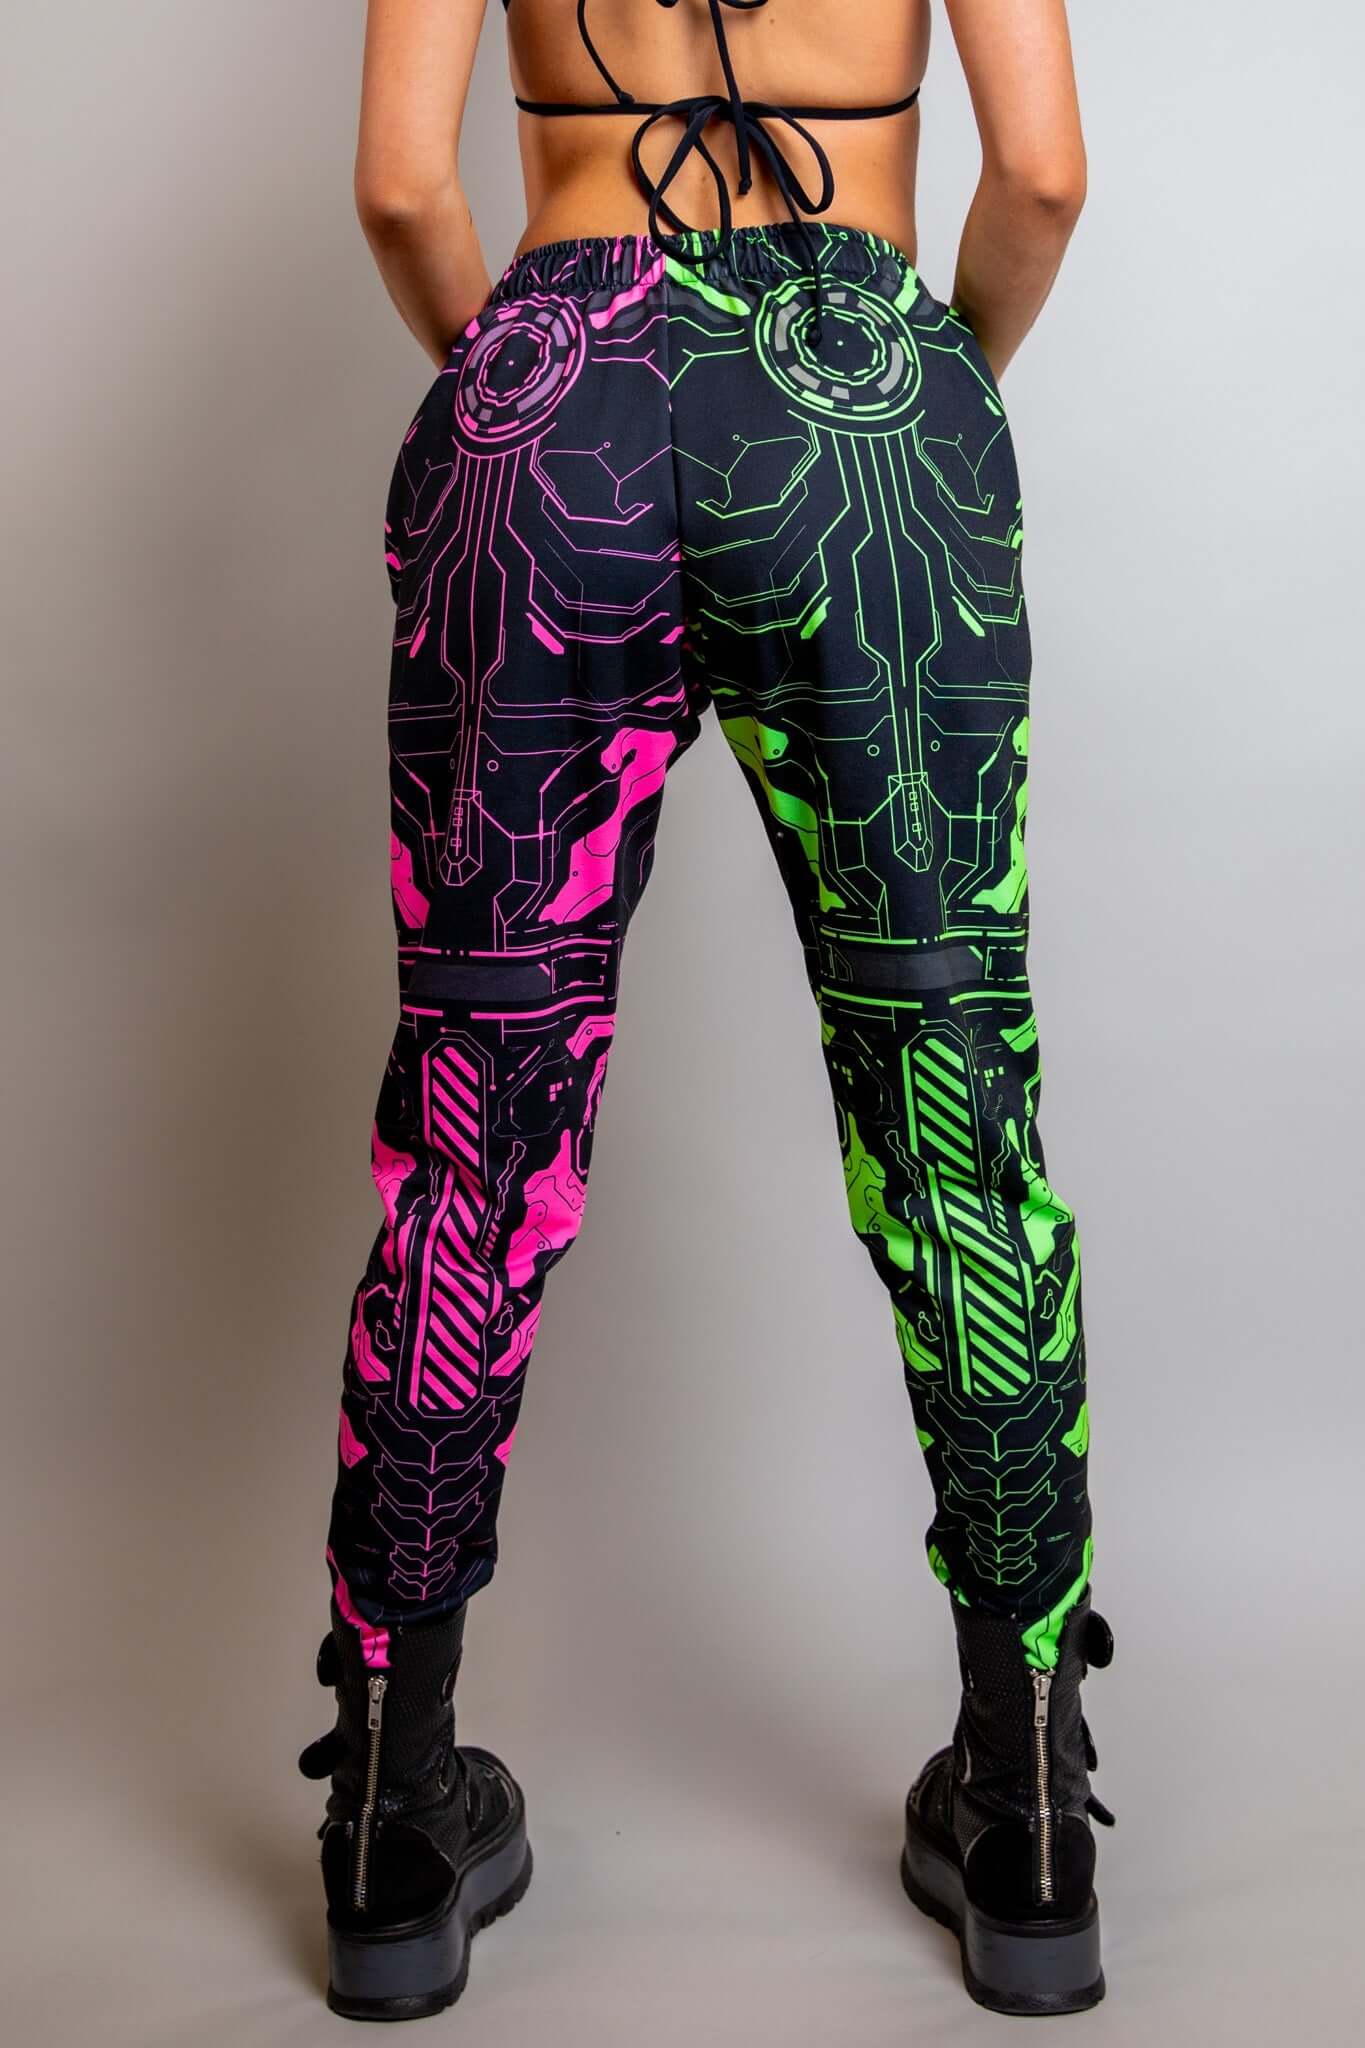 Electronika Joggers Freedom Rave Wear Size: X-Small